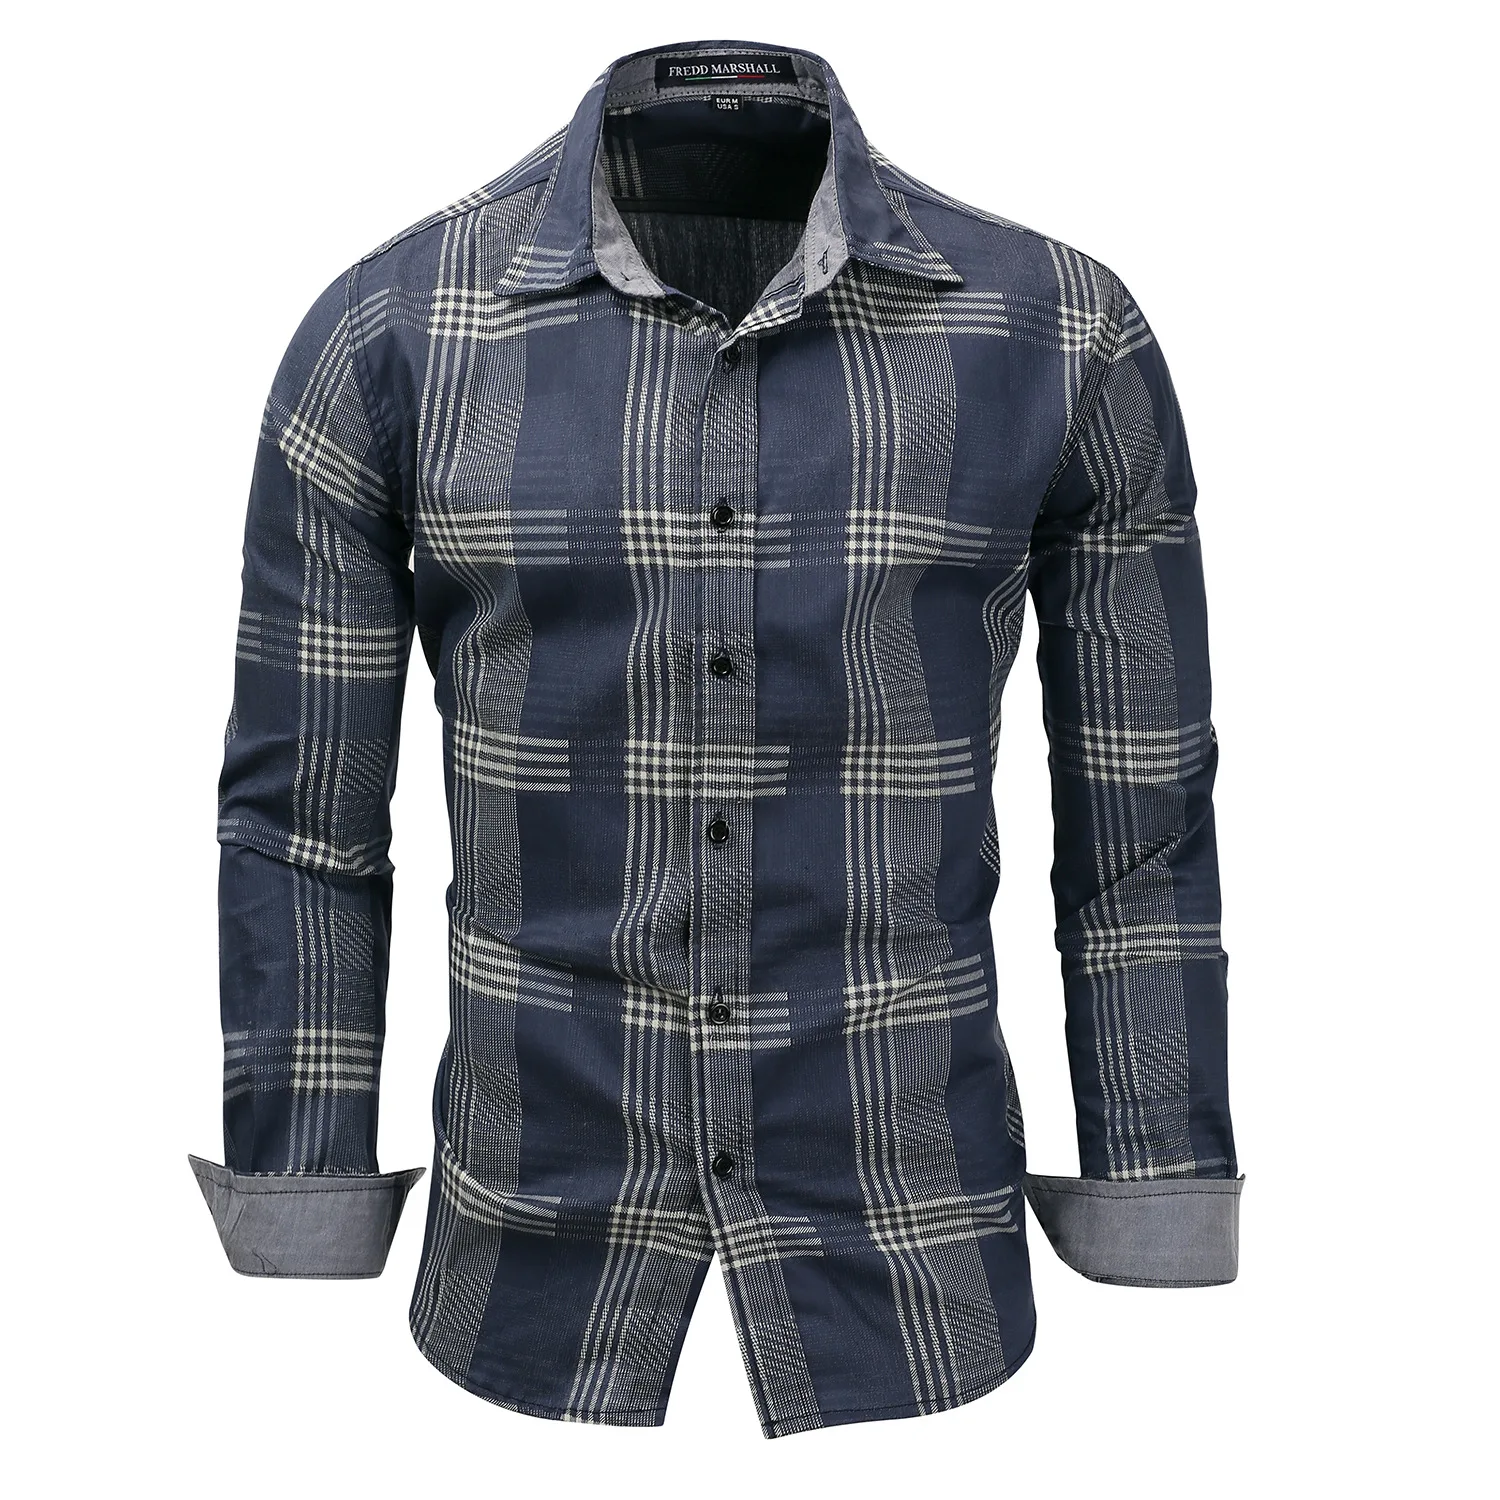 

LUCLESAM Men's Denim Shirts Color Contrast Plaid Shirt Plus Size New Casual Trend Long Sleeve Single Breasted shirt for Man